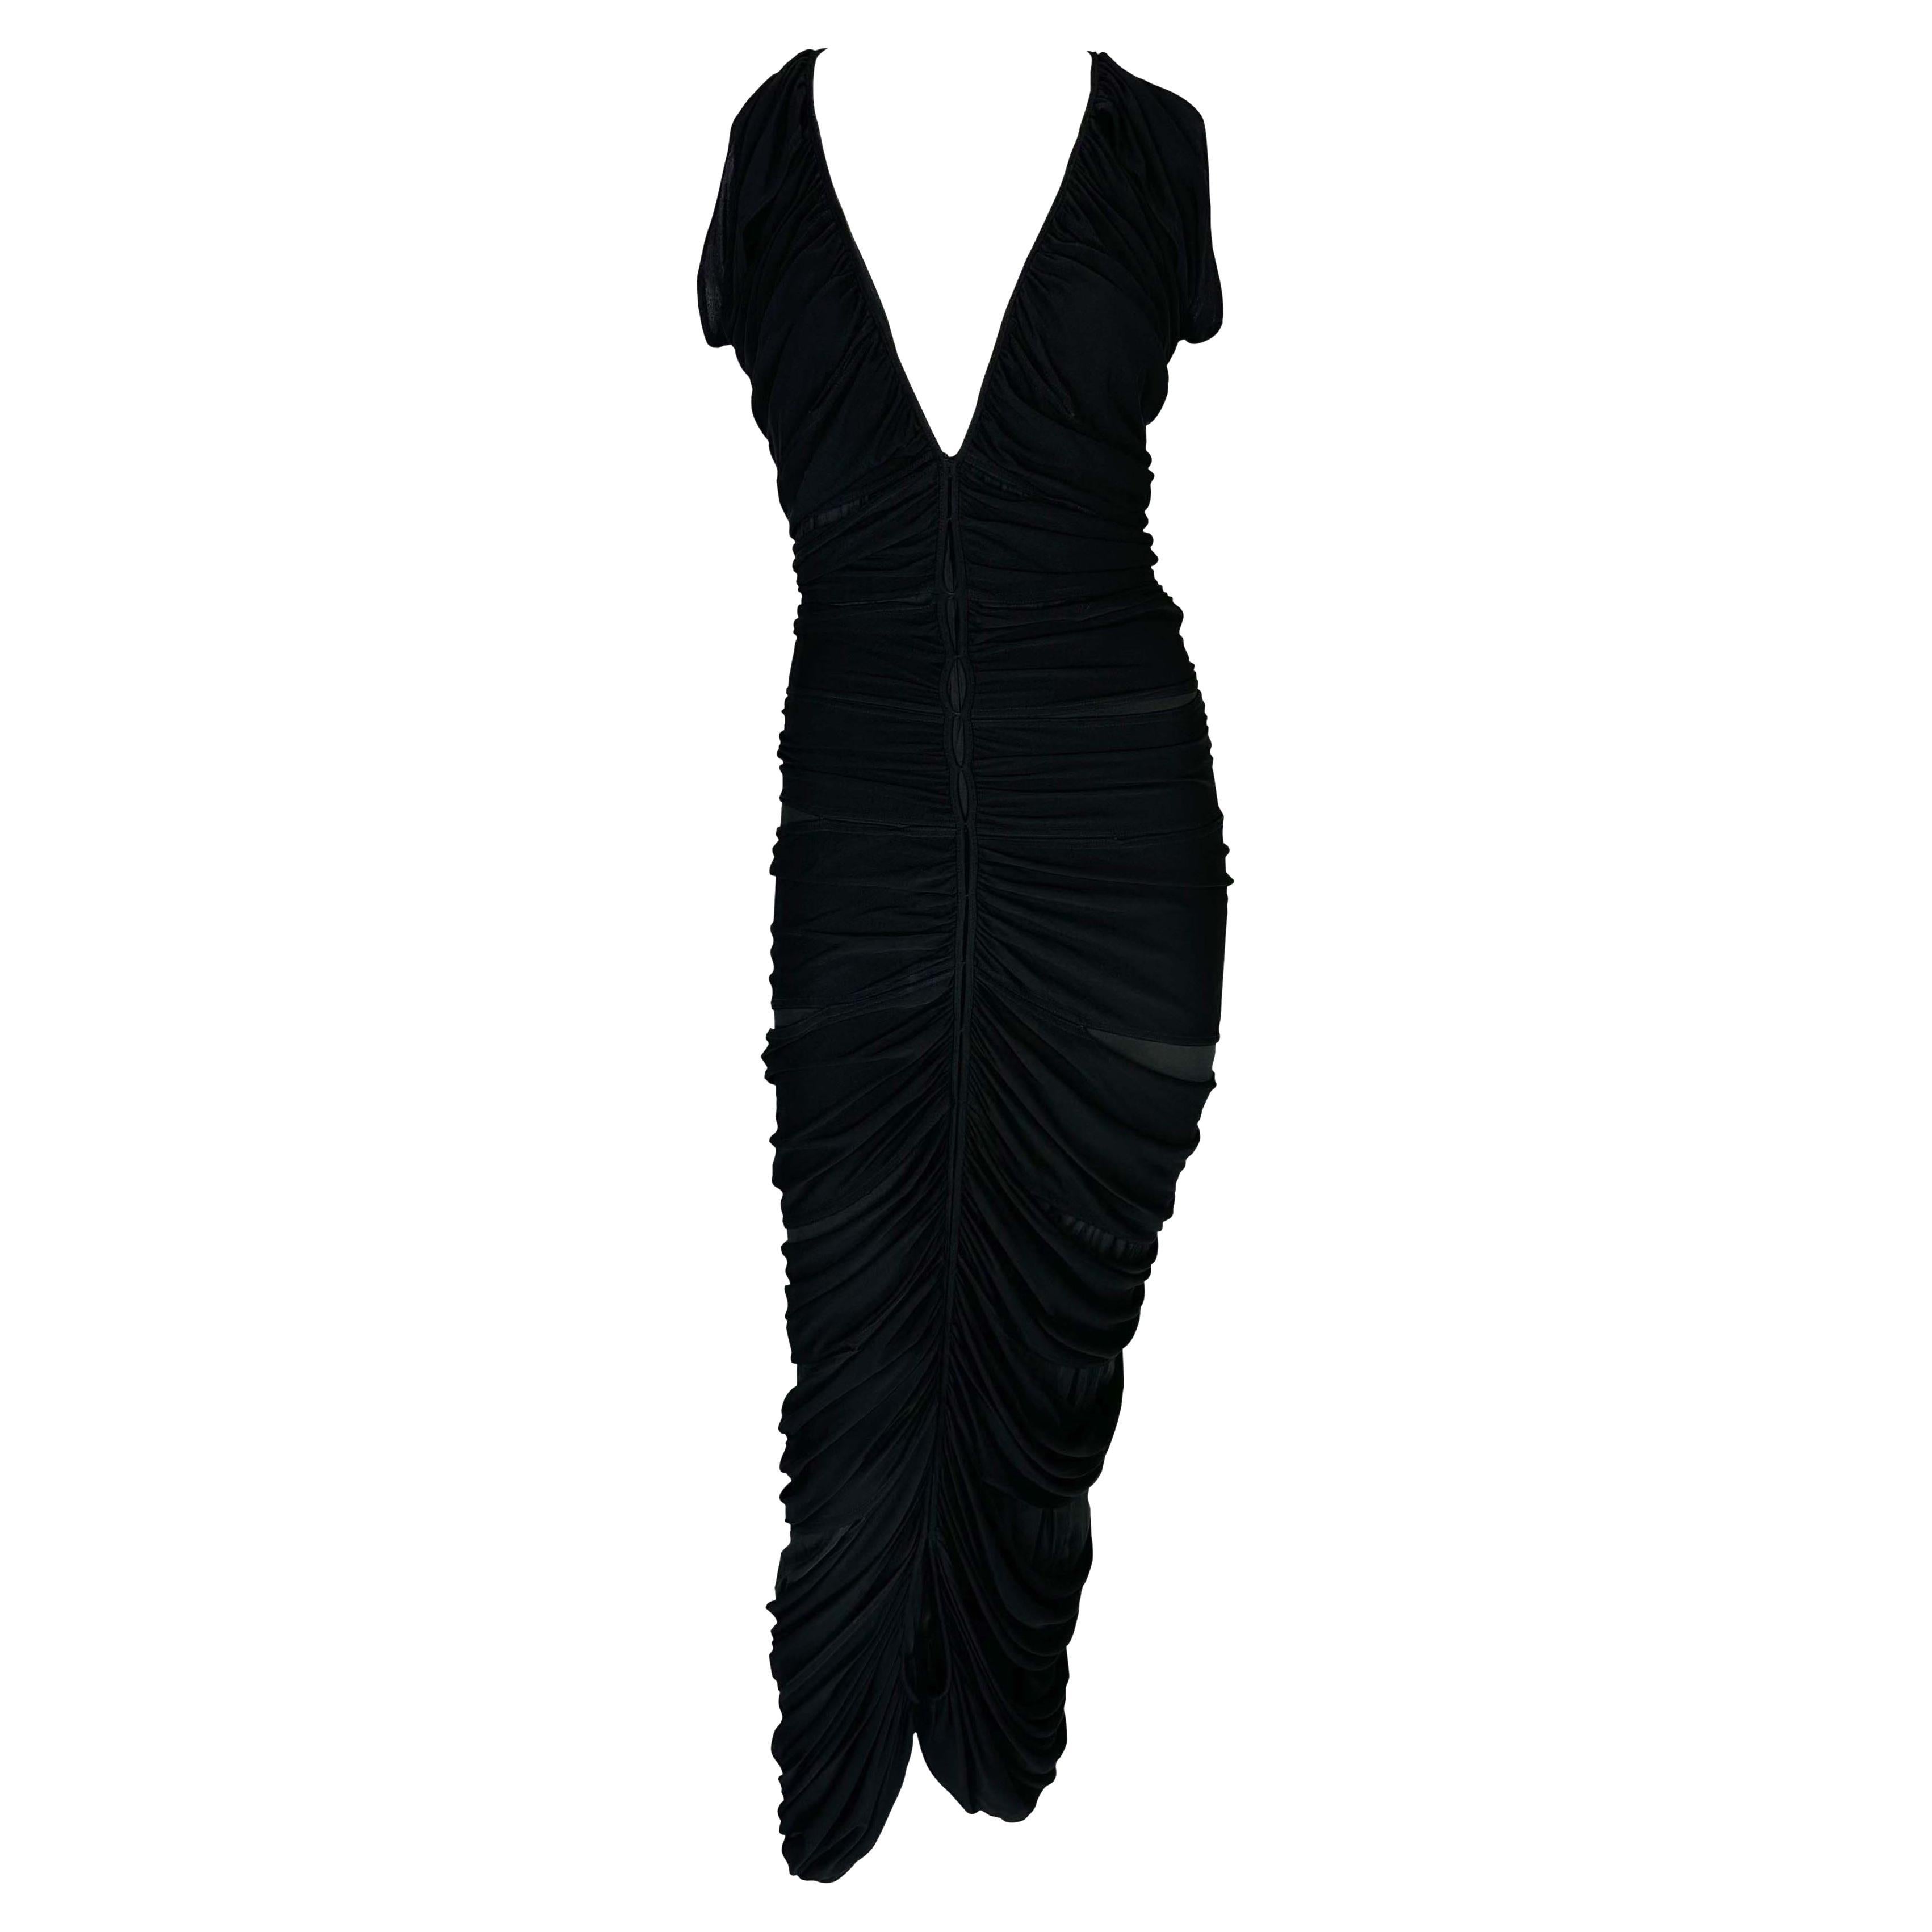 S/S 2001 Yves Saint Laurent by Tom Ford Draped Bodycon Black Viscose Dress For Sale